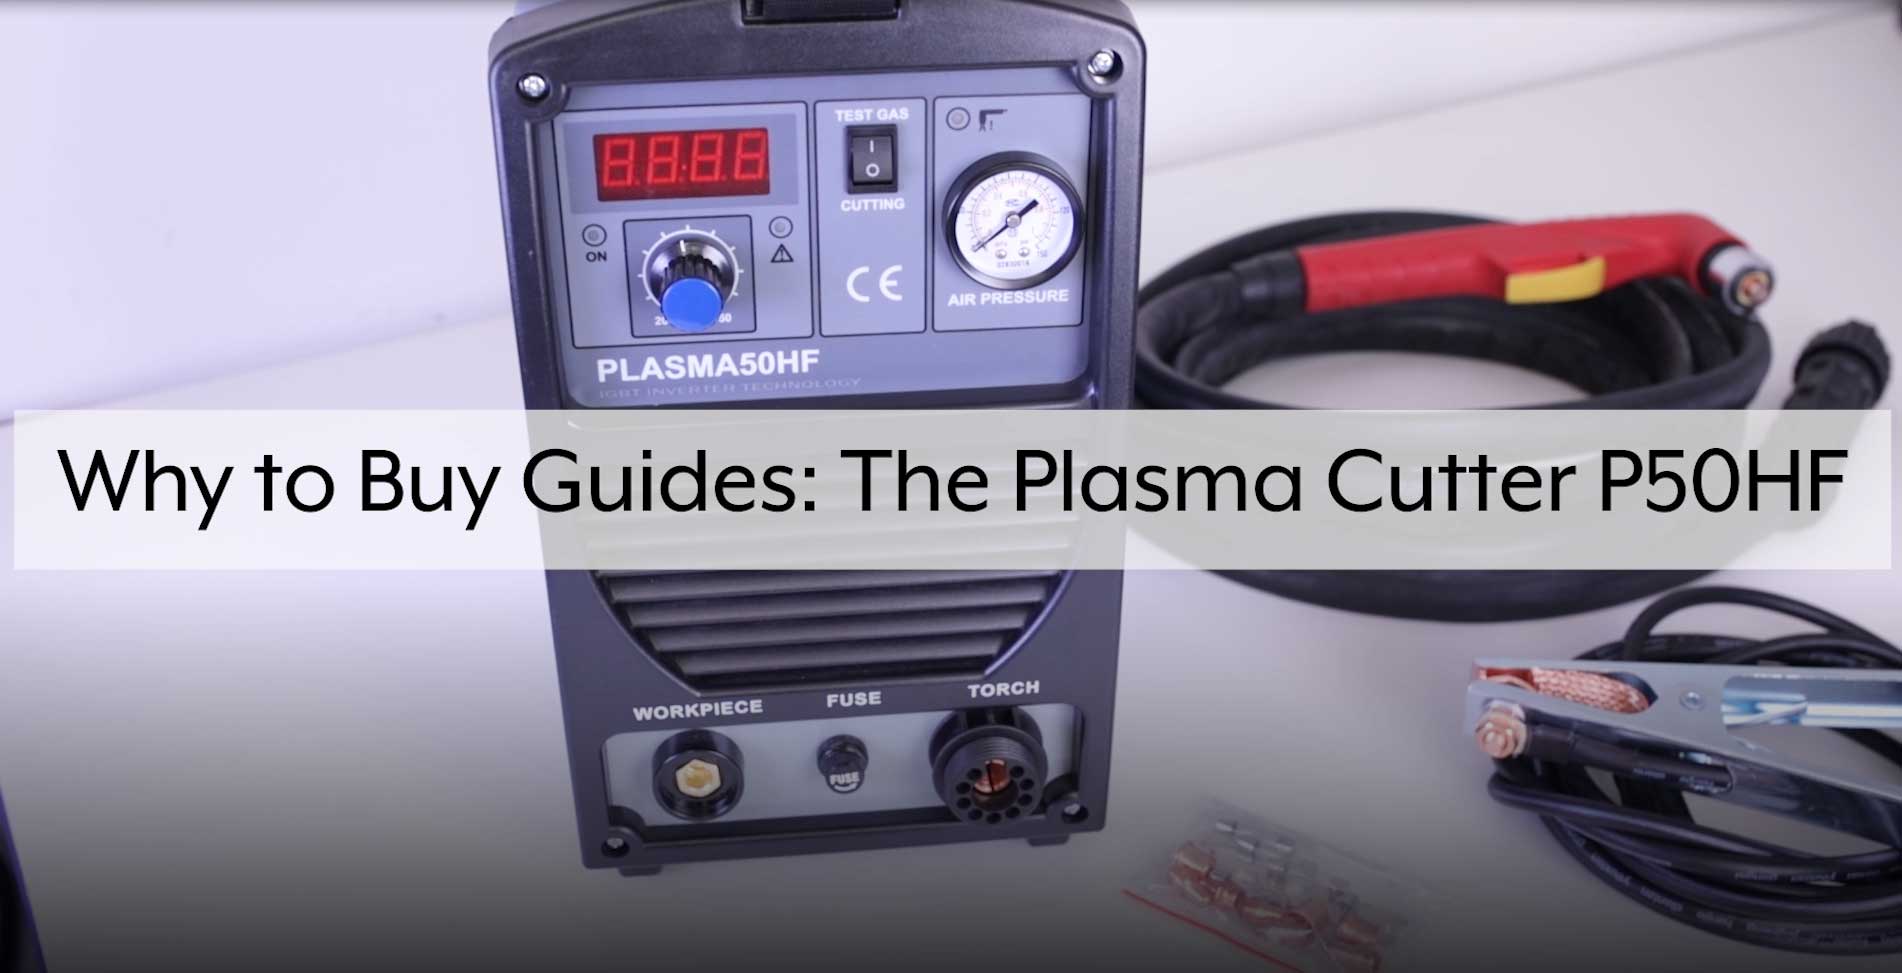 R-Tech P50HF Plasma Cutter - Why to buy guide video